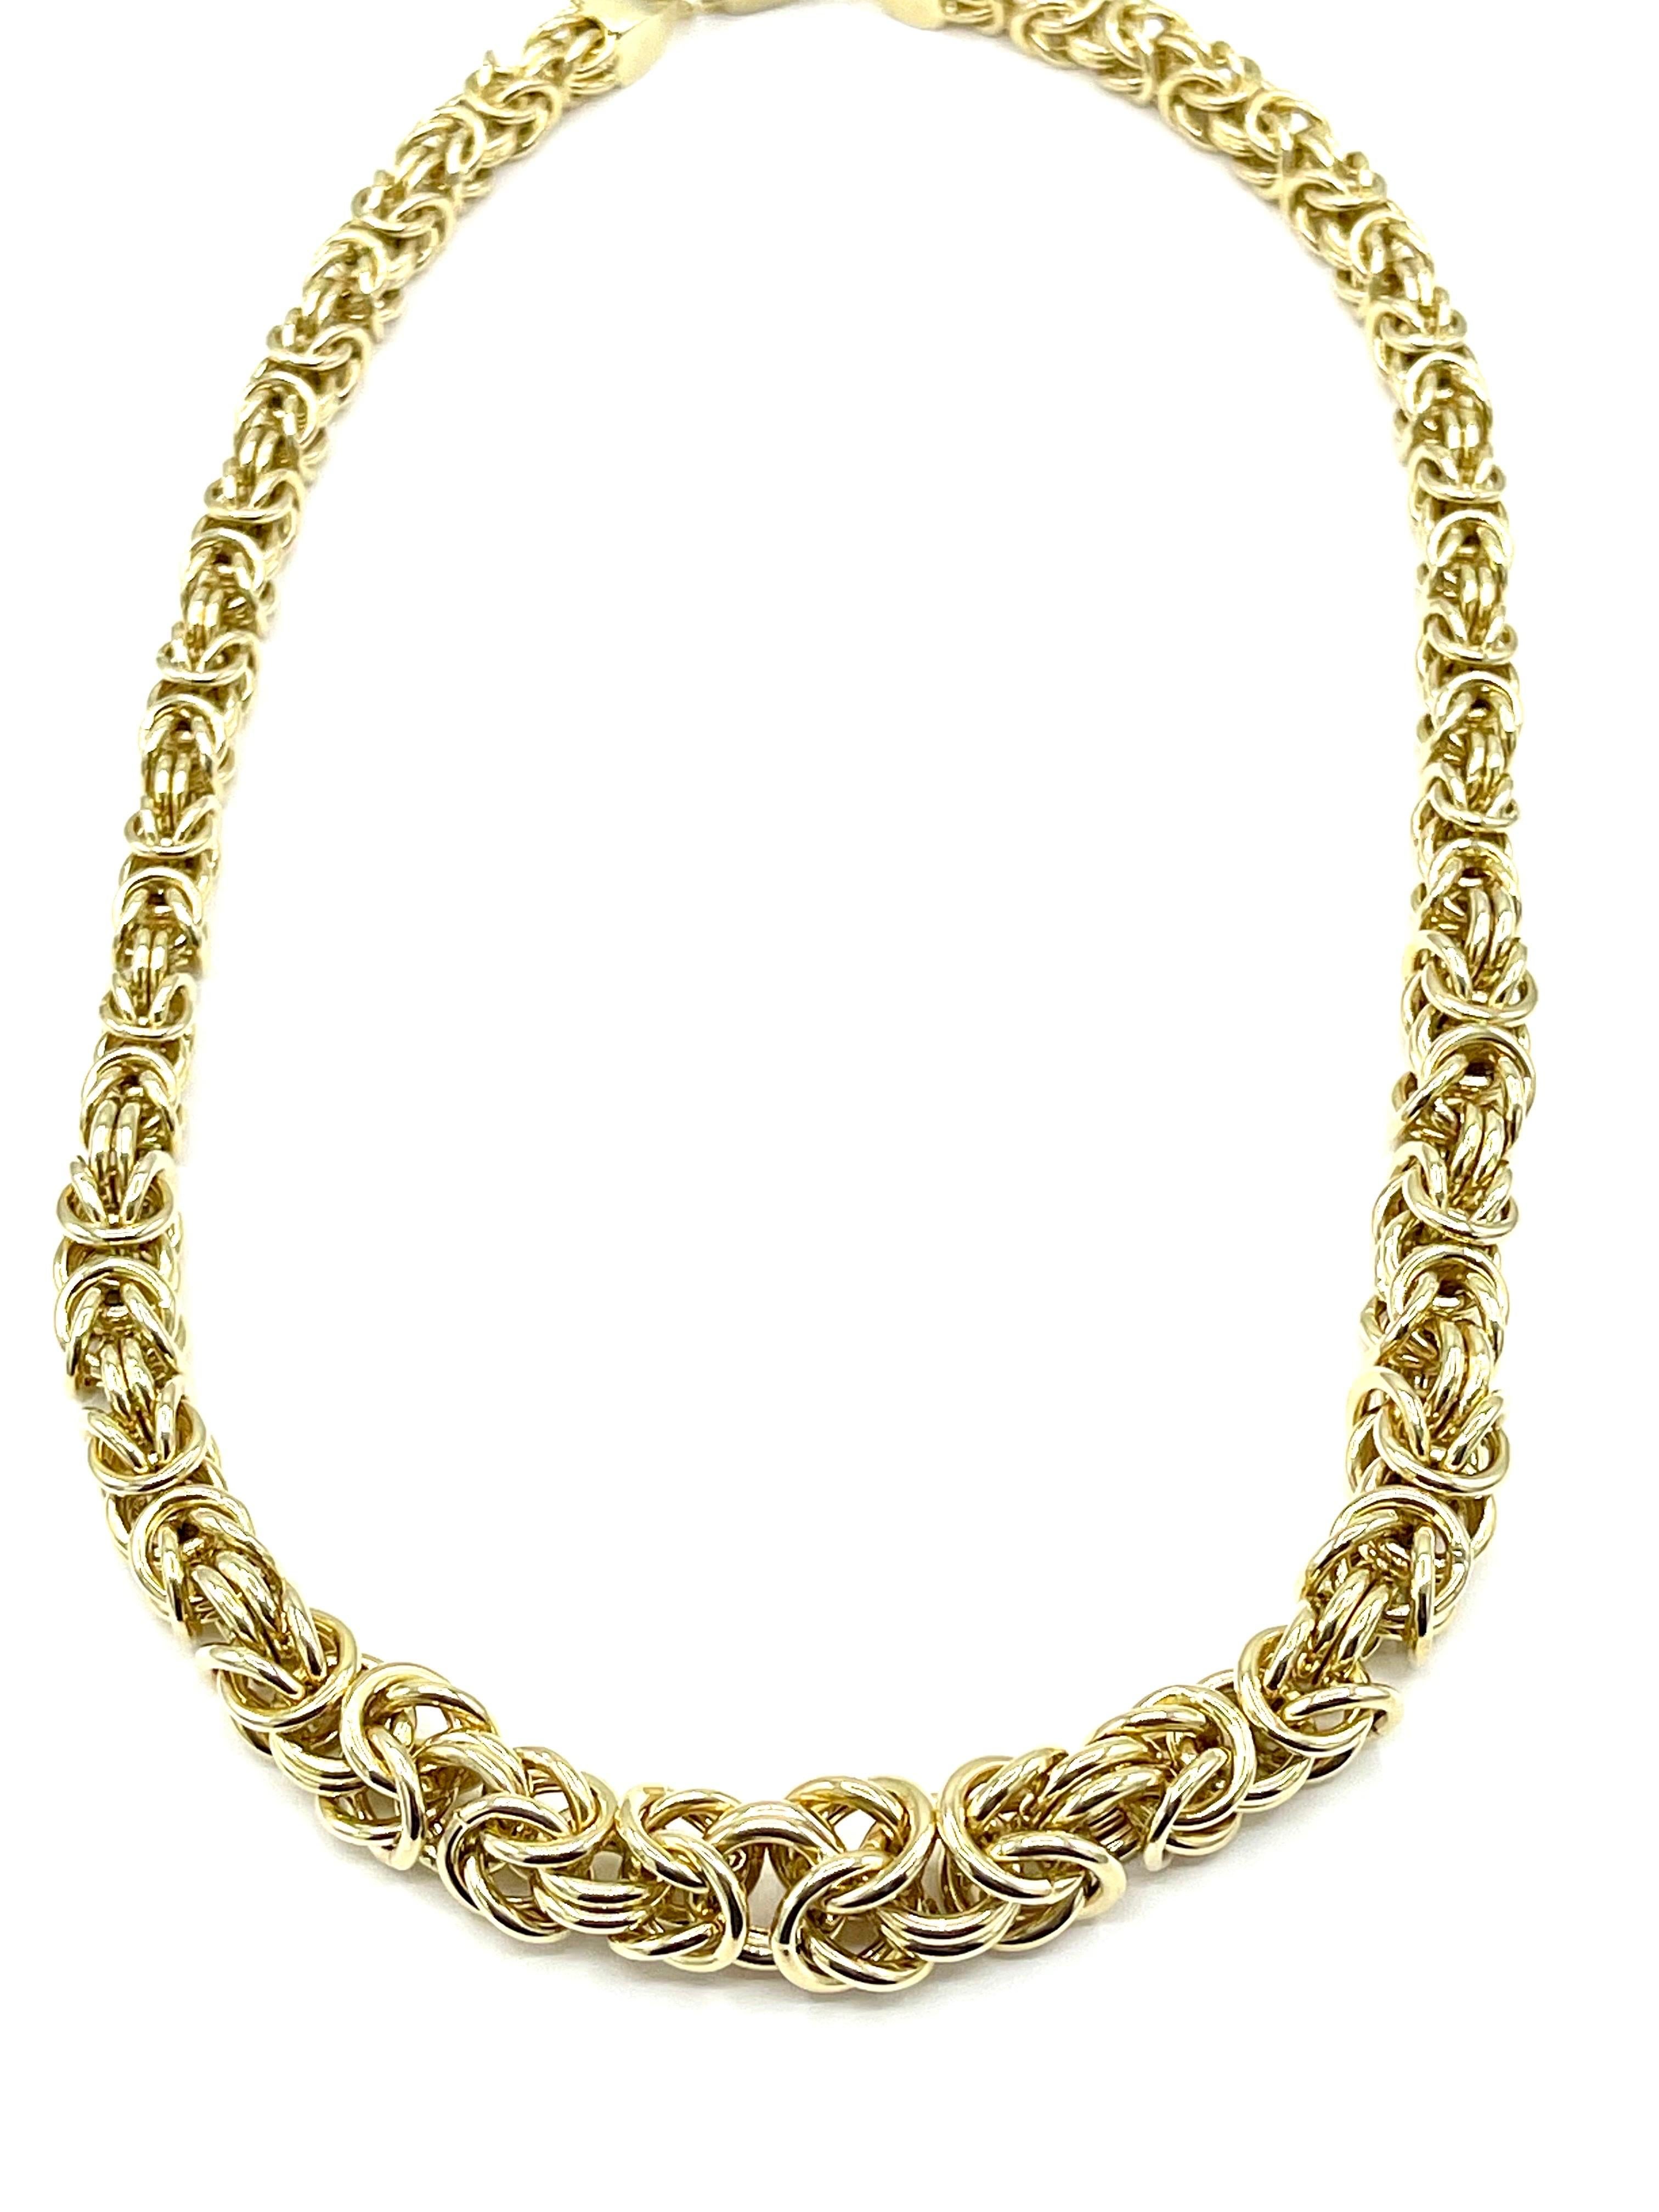 A soft wearable graduated 14 karat yellow gold Byzantine link necklace.  The necklace measures 18.00 inches in length and graduates from 7.00 to 12.00mm in width.  The necklace lays beautifully on the neck.  The clasp of the necklace is stamped